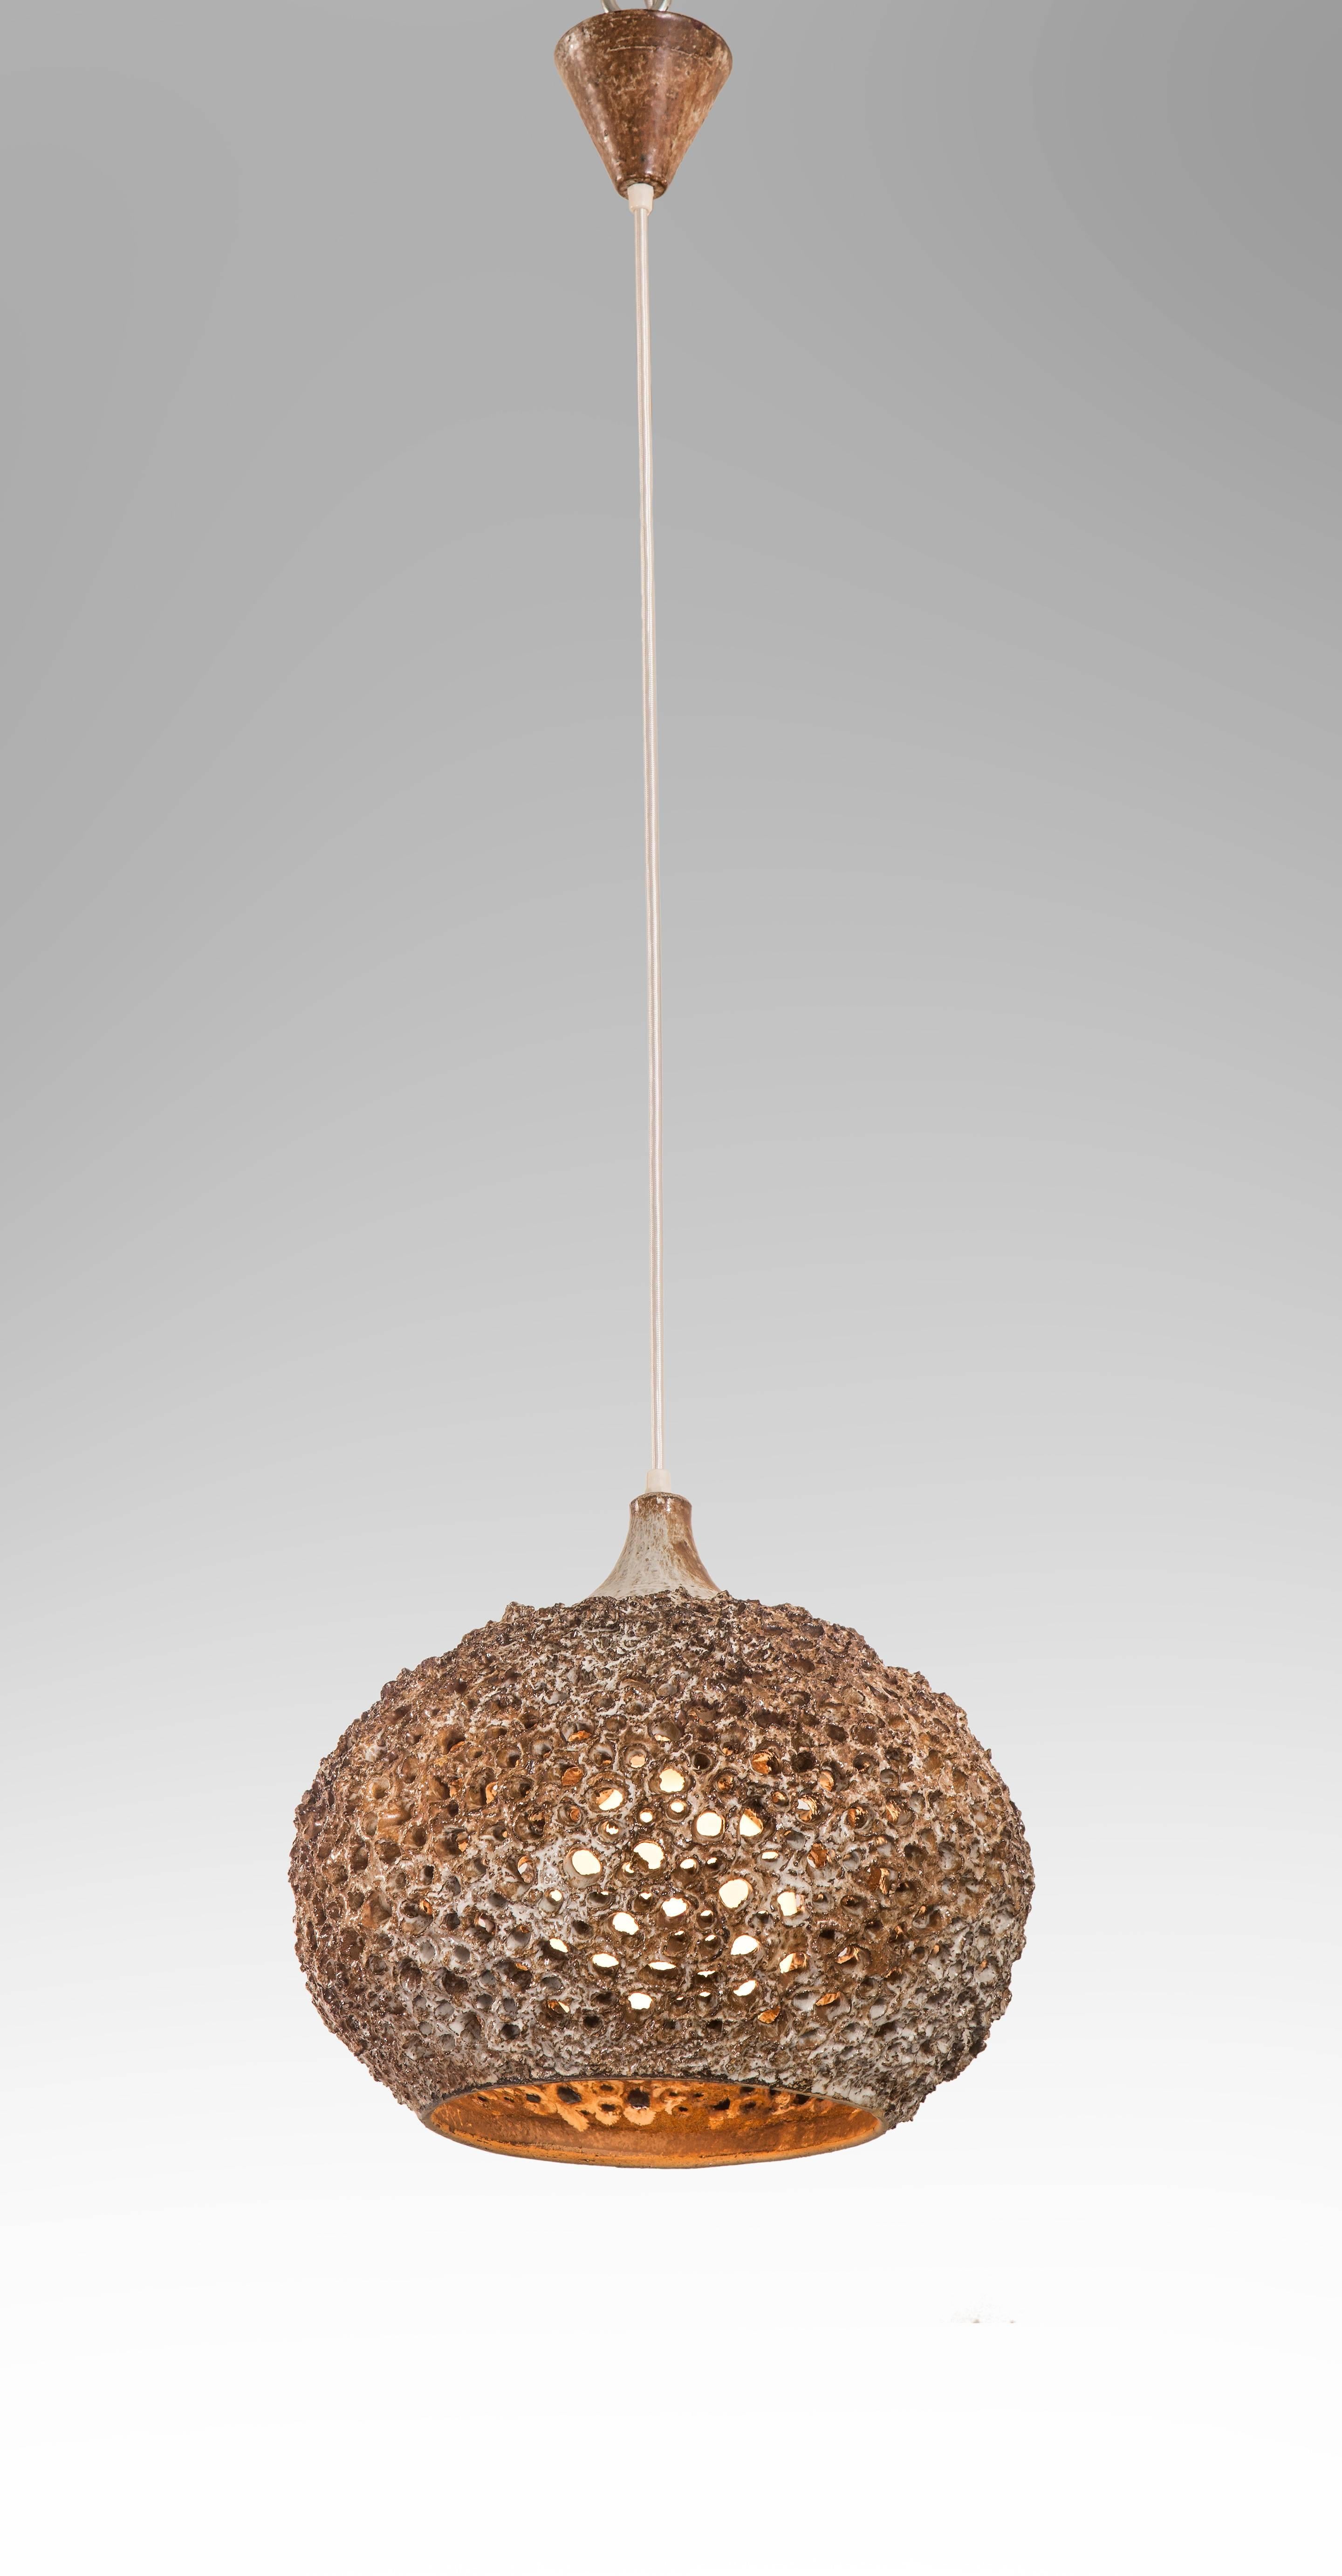 Intriguing and innovative chandeliers with delightfully unexpected openwork construction. Each with a variegated glazed canopy, above a cord suspending a perforated ceramic diffuser. 

Height is easily adjustable. 
Overall height: 53"
Diffuser